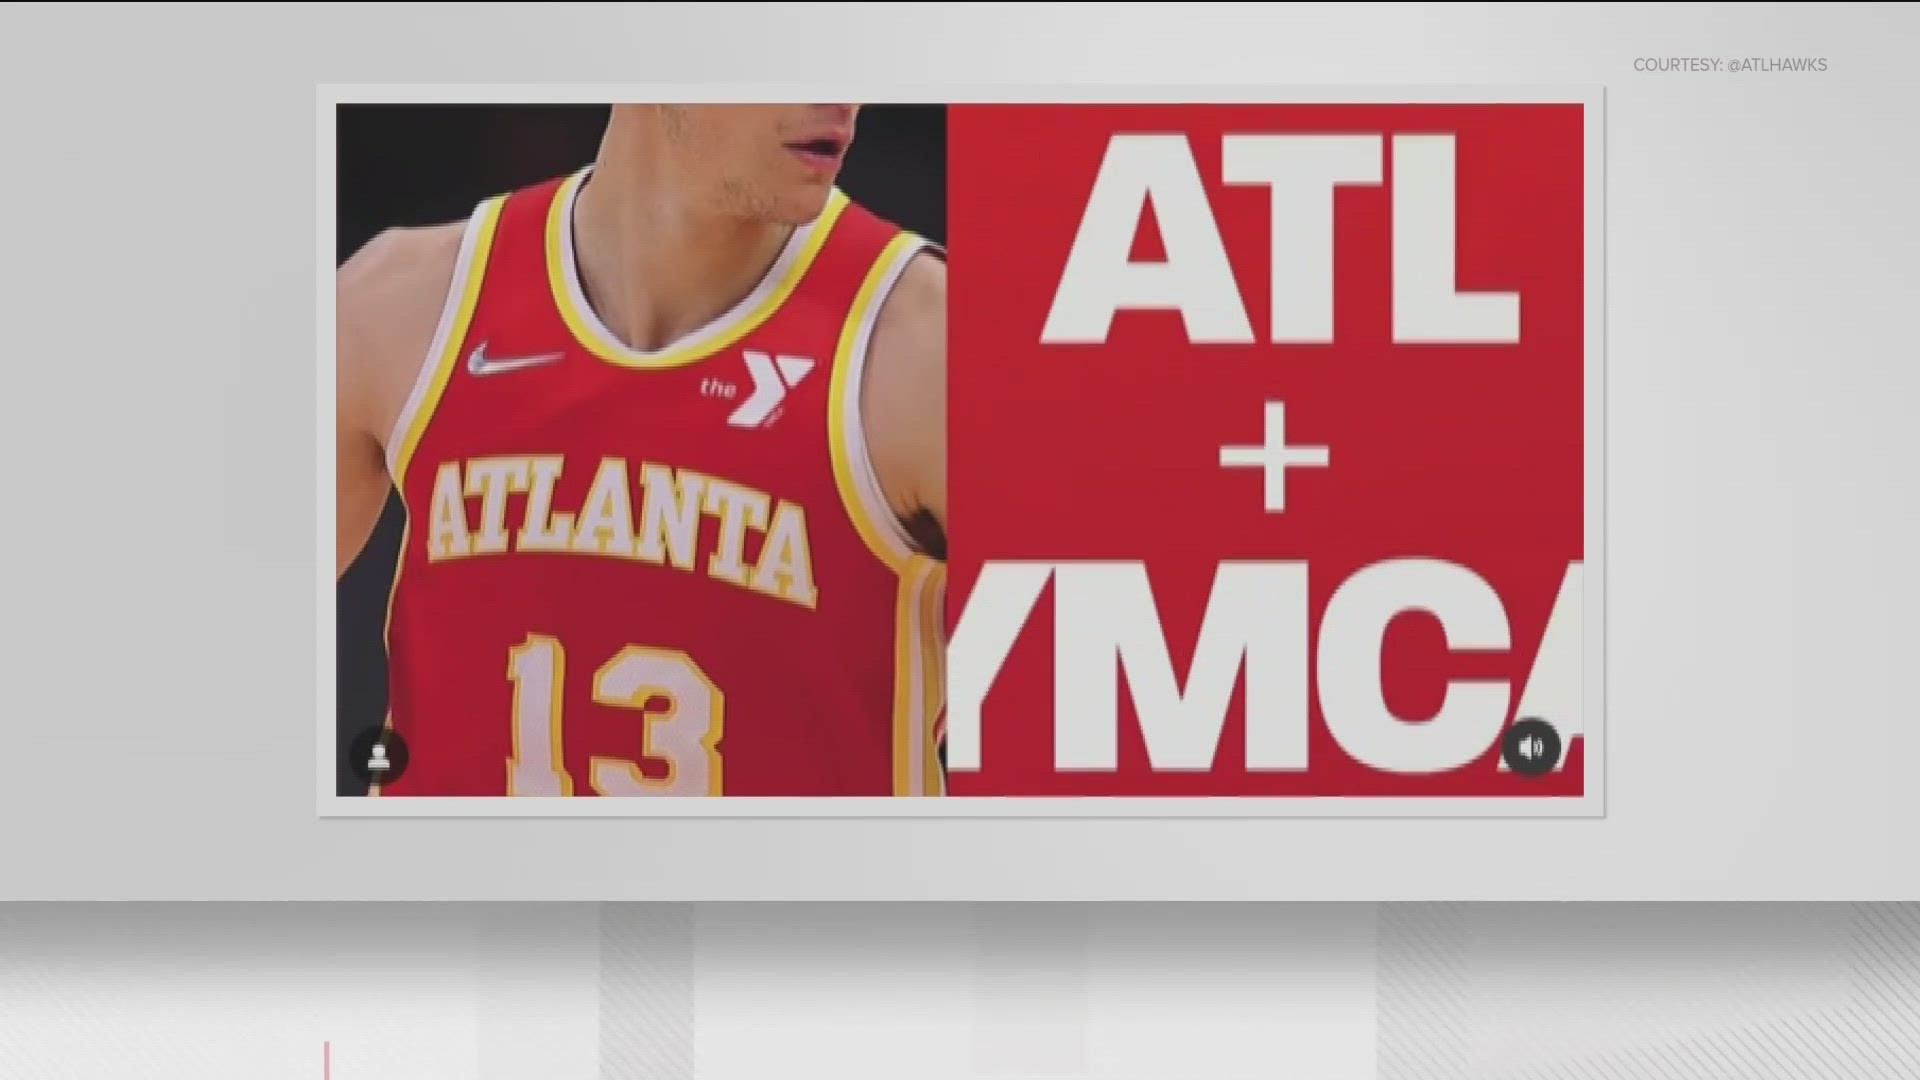 The team announced a wide-ranging agreement with the YMCA of Metro Atlanta that will see the iconic "Y" logo appear on Hawks jerseys starting Tuesday.